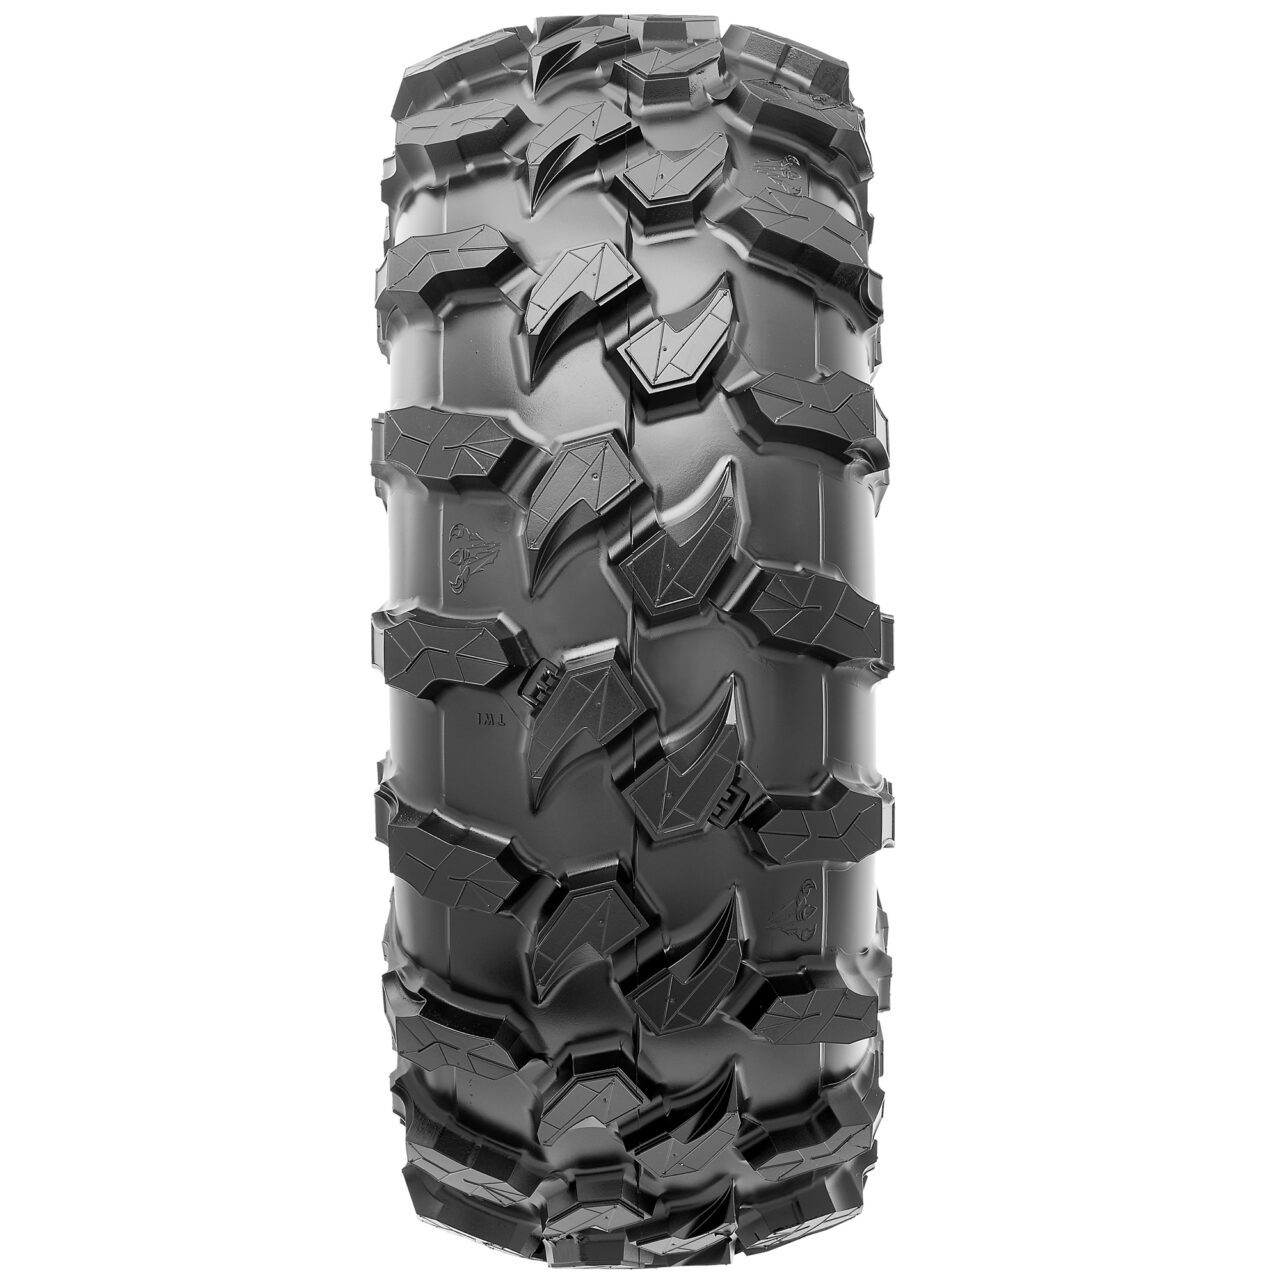 Maxxis Carnage SxS tire